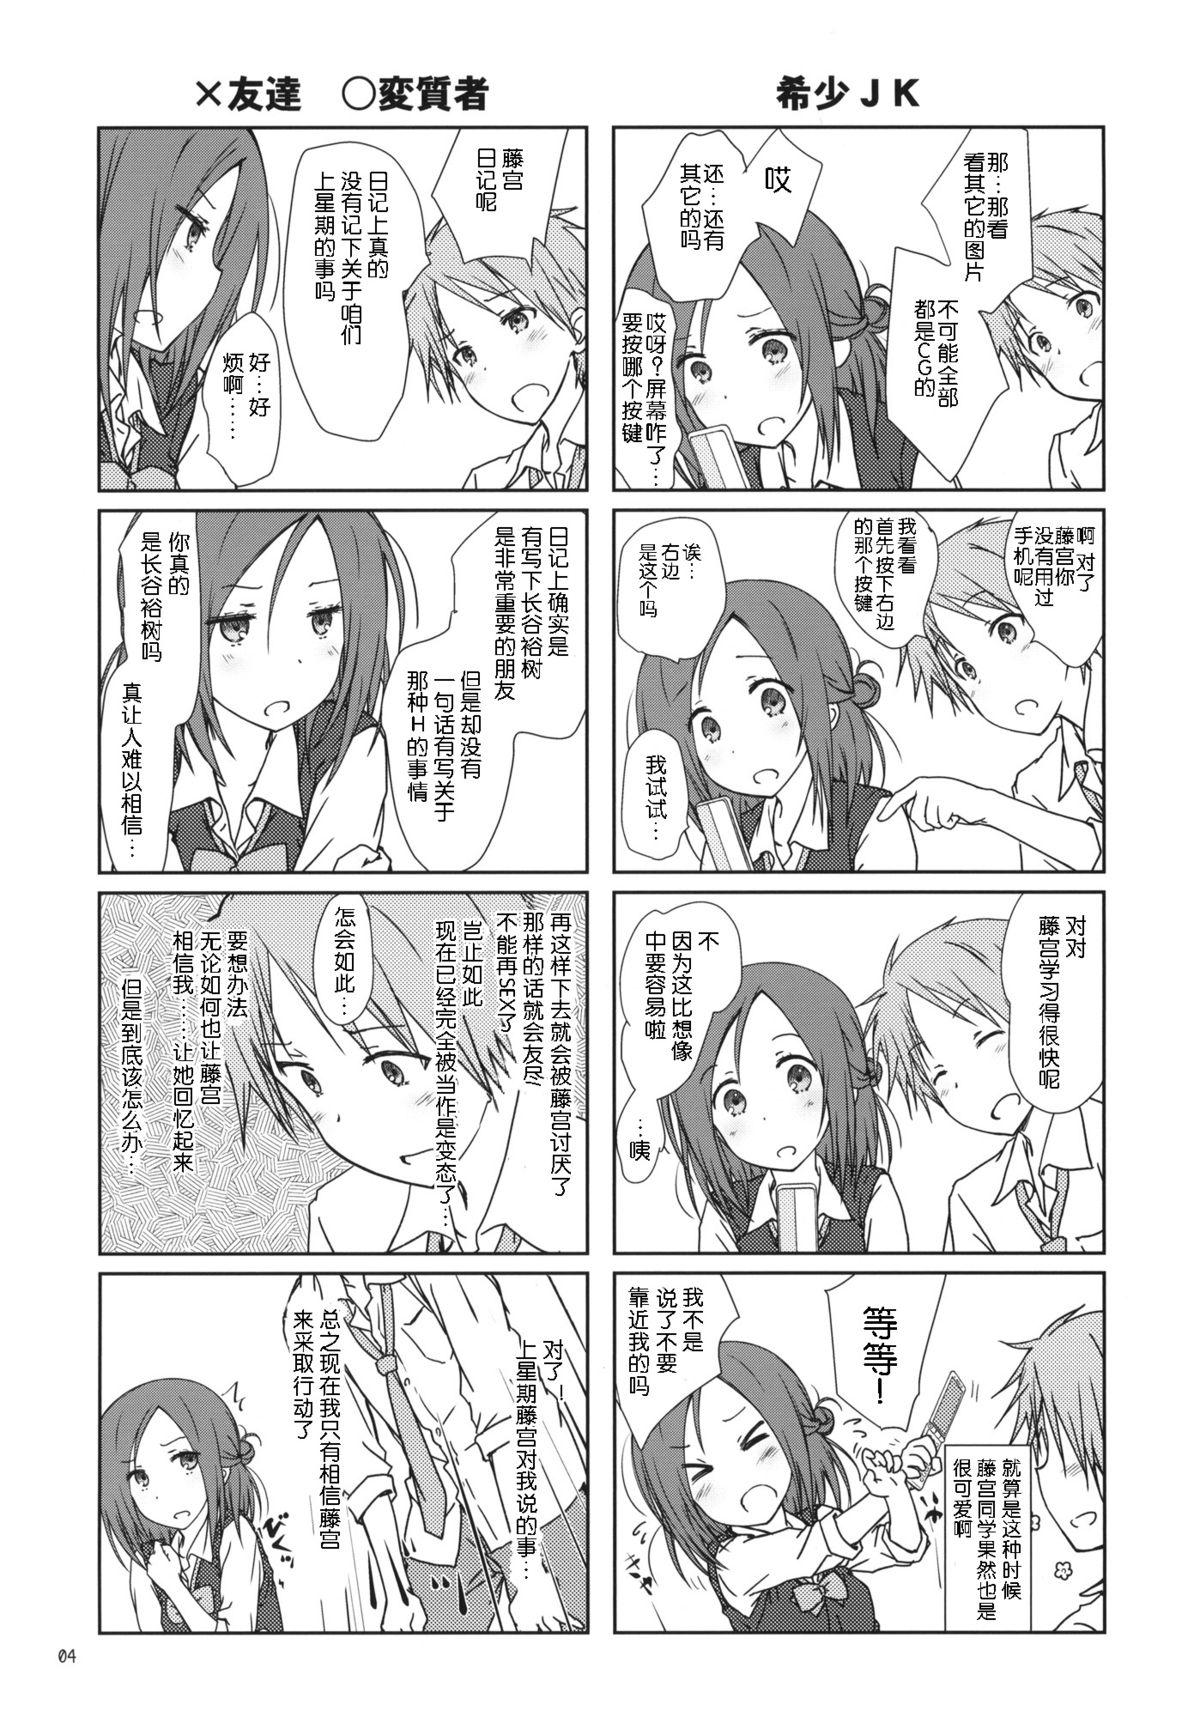 Perverted "Tomodachi to no Sex." - One week friends Classic - Page 4